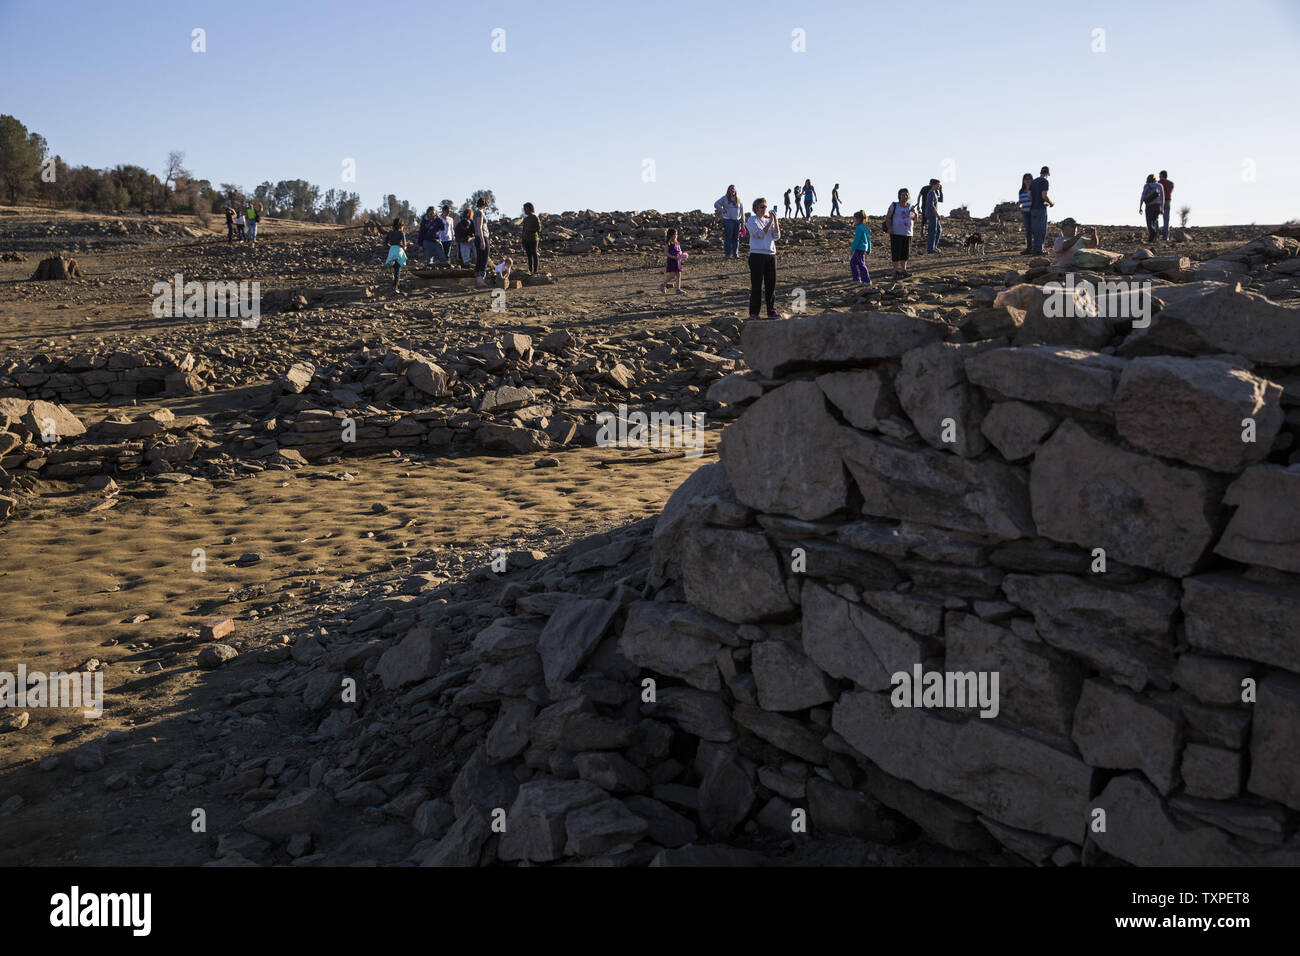 People look over remains of the old Gold Rush settlement of Mormon Island which has resurfaced due to the historic low water levels of Folsom Lake, in Folsom, California, on January 19, 2014. California Governor Jerry Brown declared a state wide drought last Friday. UPI/Ken James Stock Photo